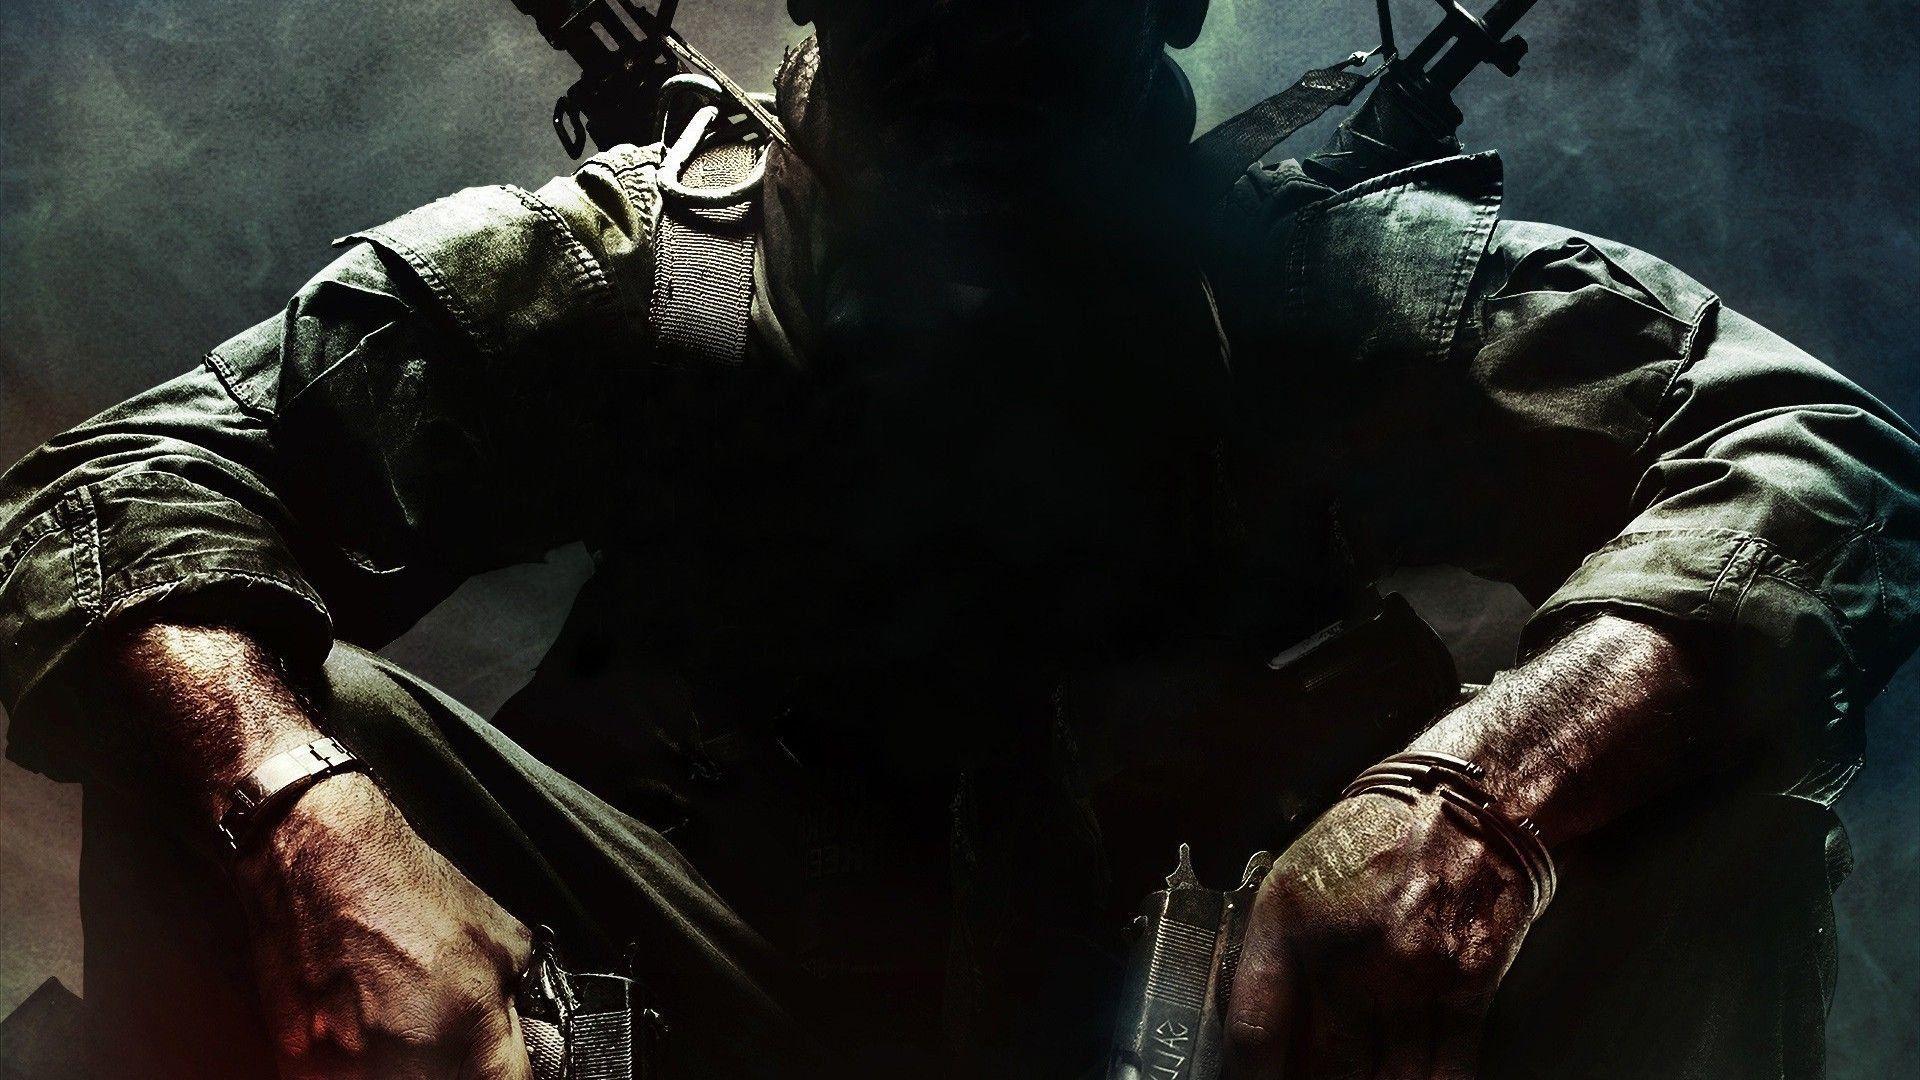 best call of duty black ops cold war backgrounds